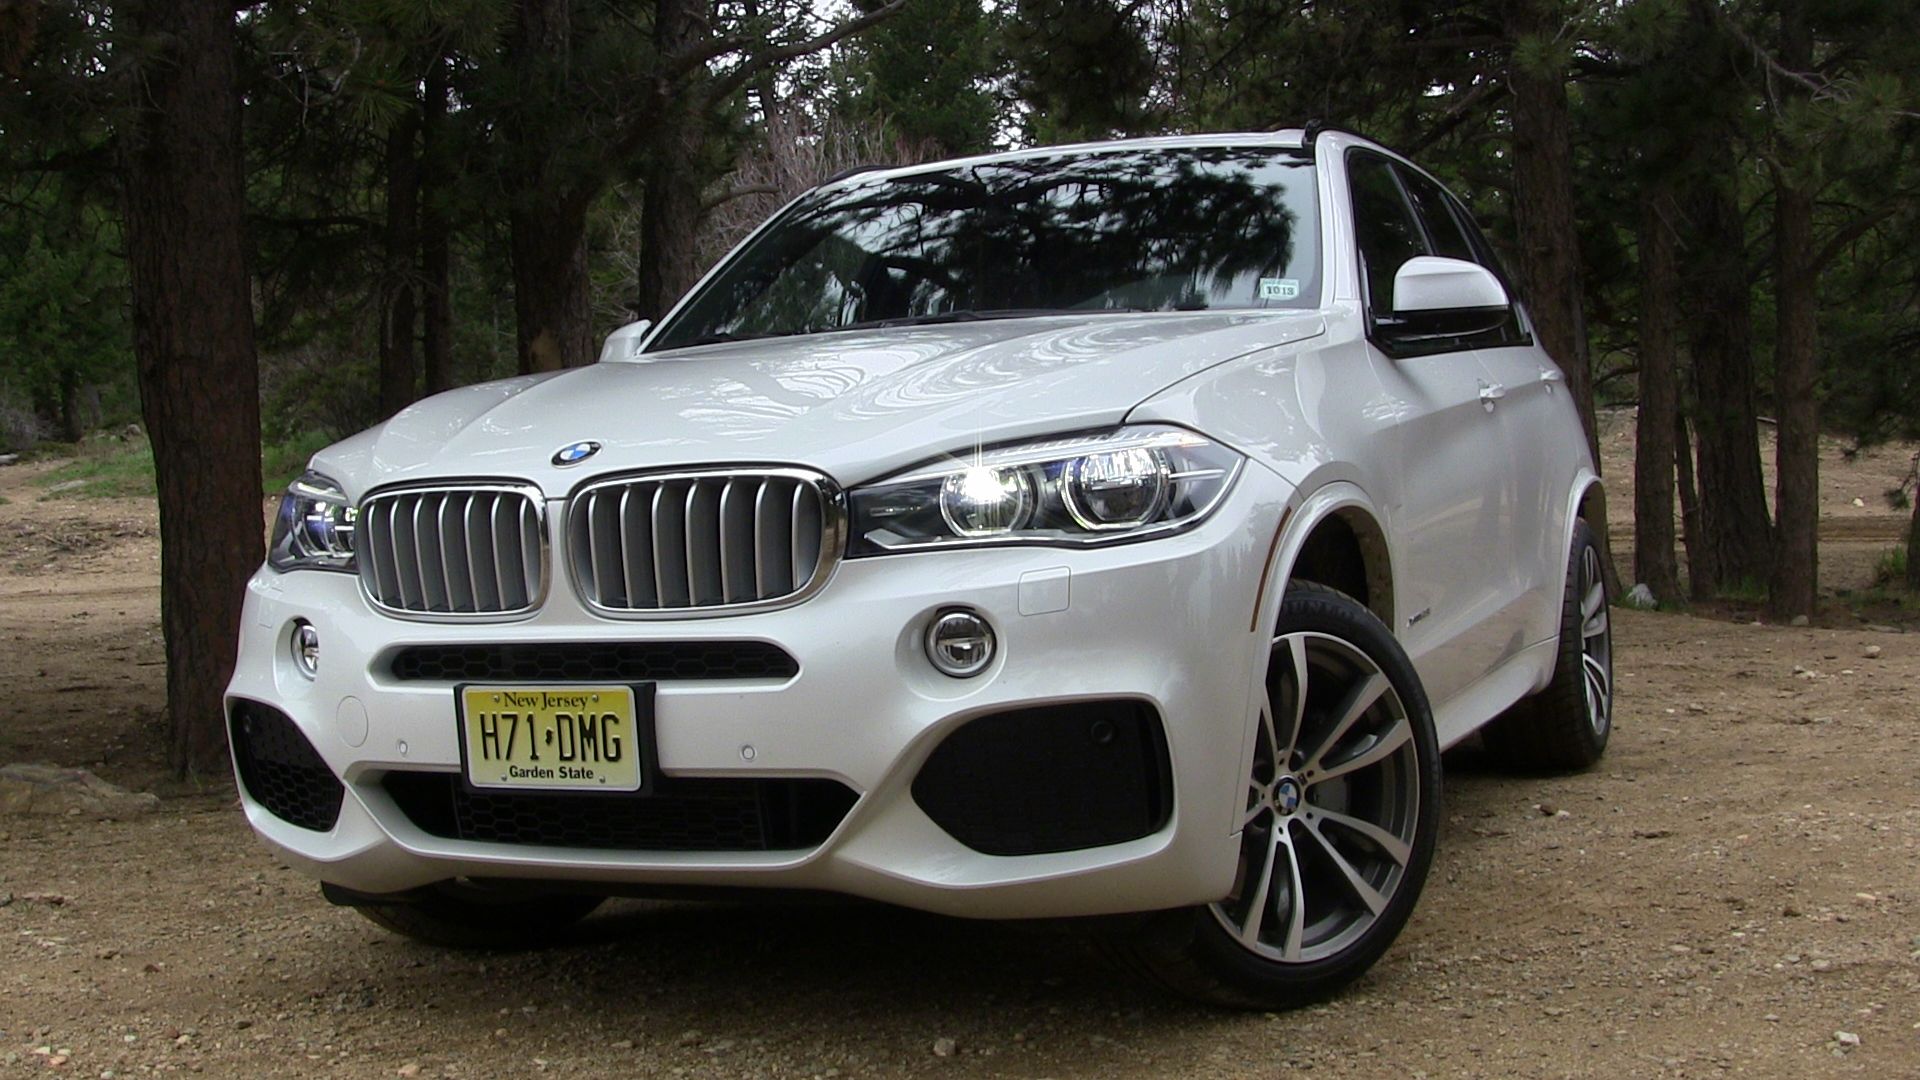 2014 Bmw X5 Xdrive50i Defies The Laws Of Physics Review